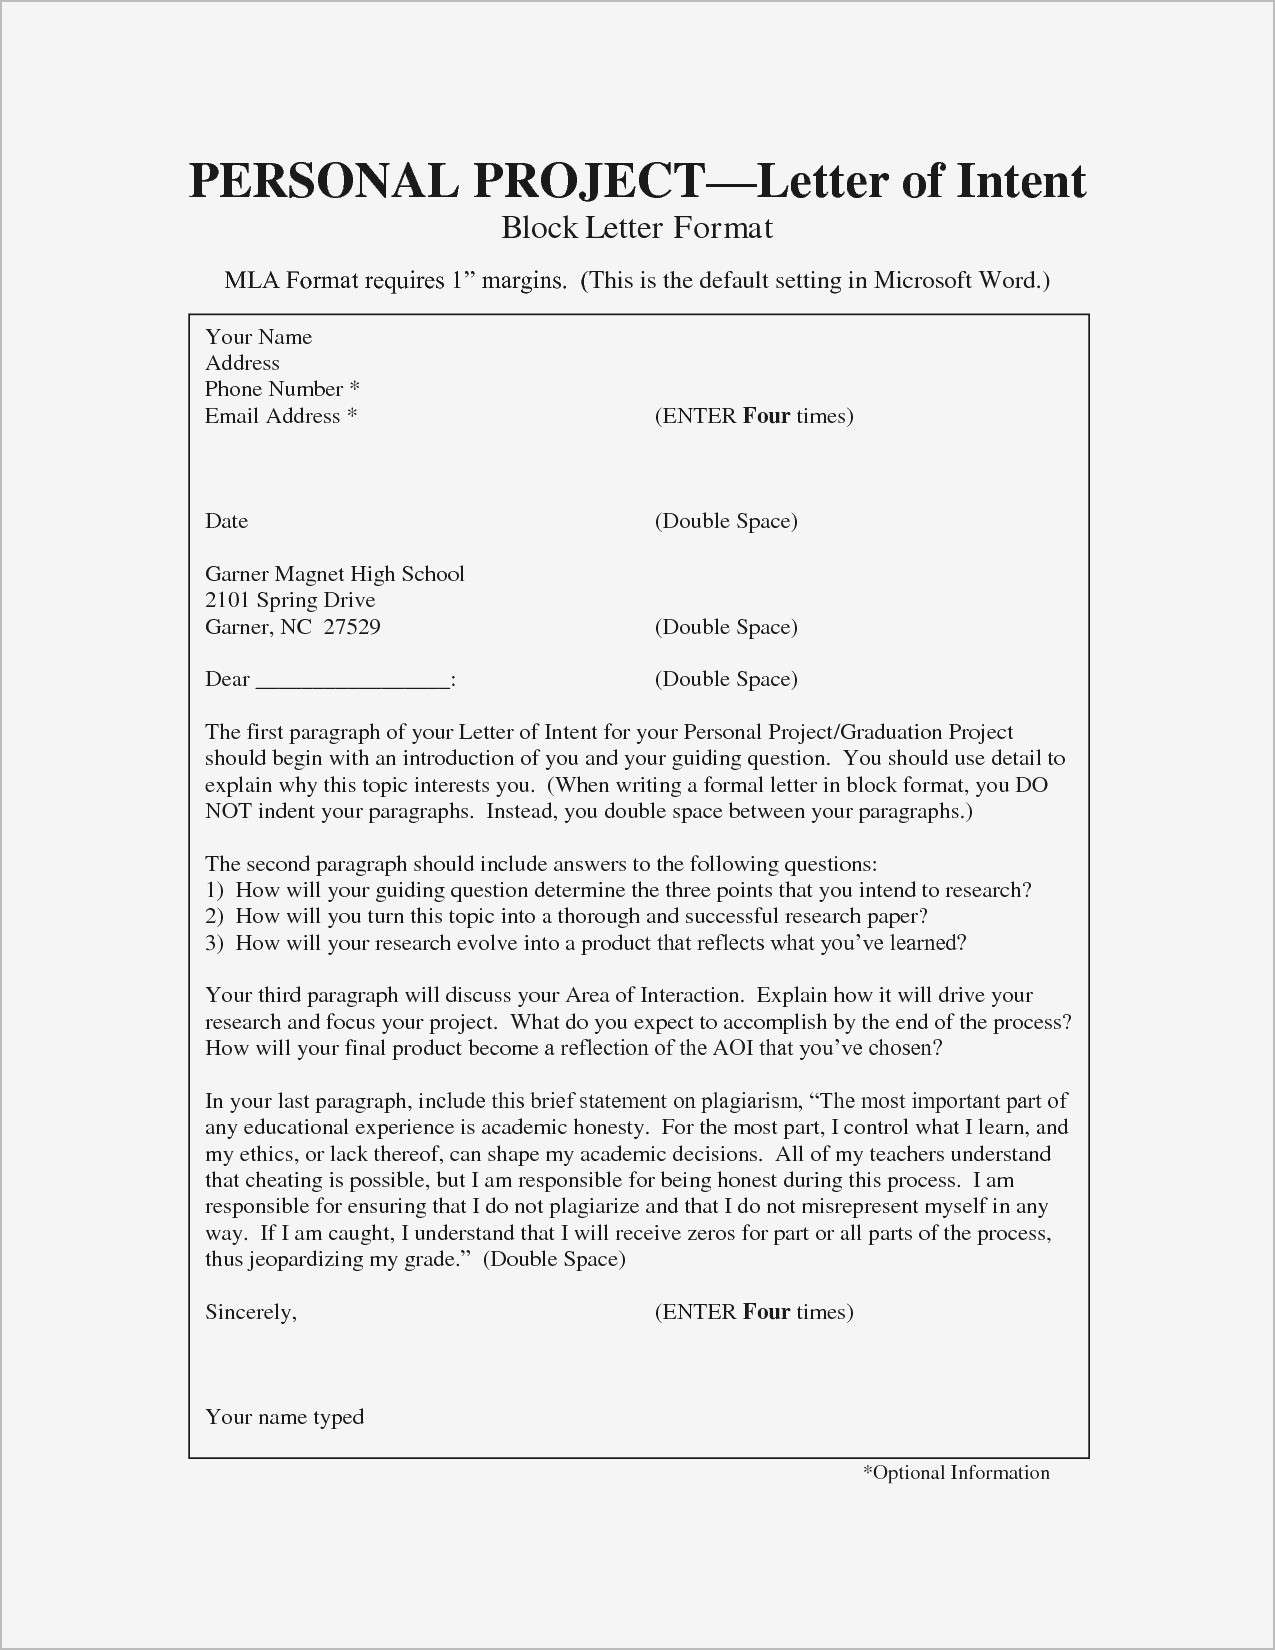 Letter Of Intent for Graduate School Template - 21 Get Graduate School Letter Intent Template Zgofkxs